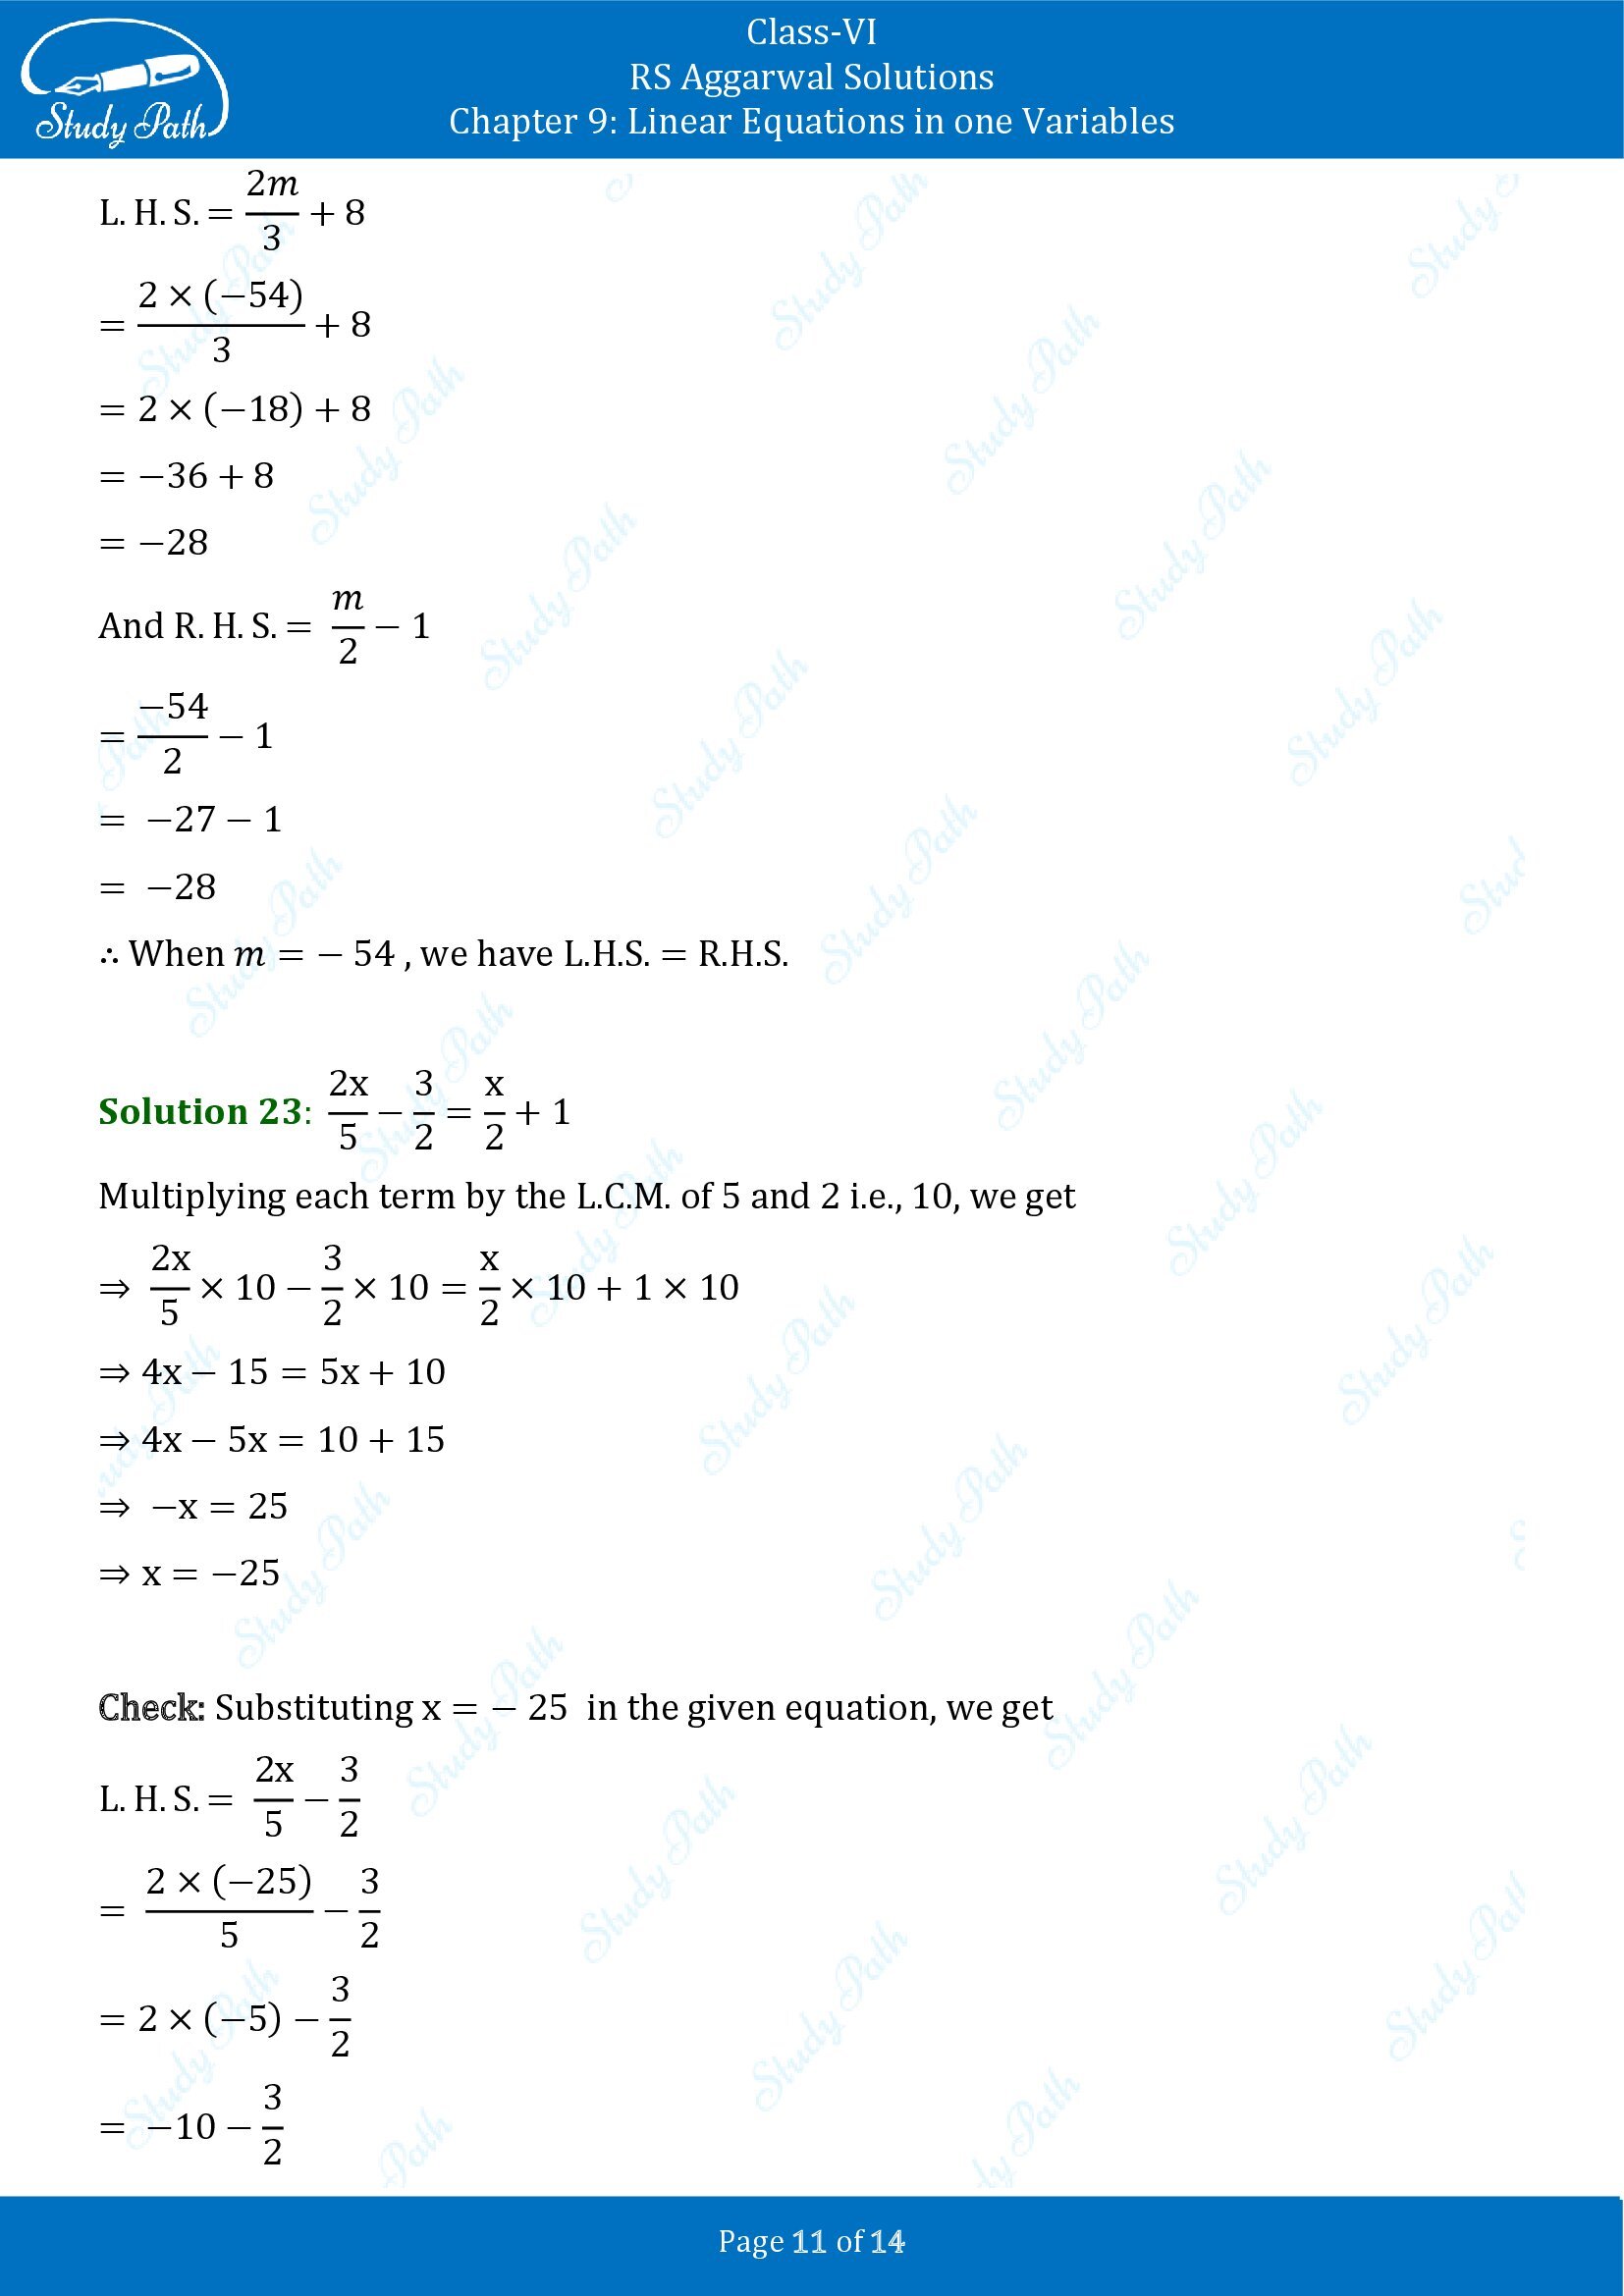 RS Aggarwal Solutions Class 6 Chapter 9 Linear Equations in One Variable Exercise 9B 00011